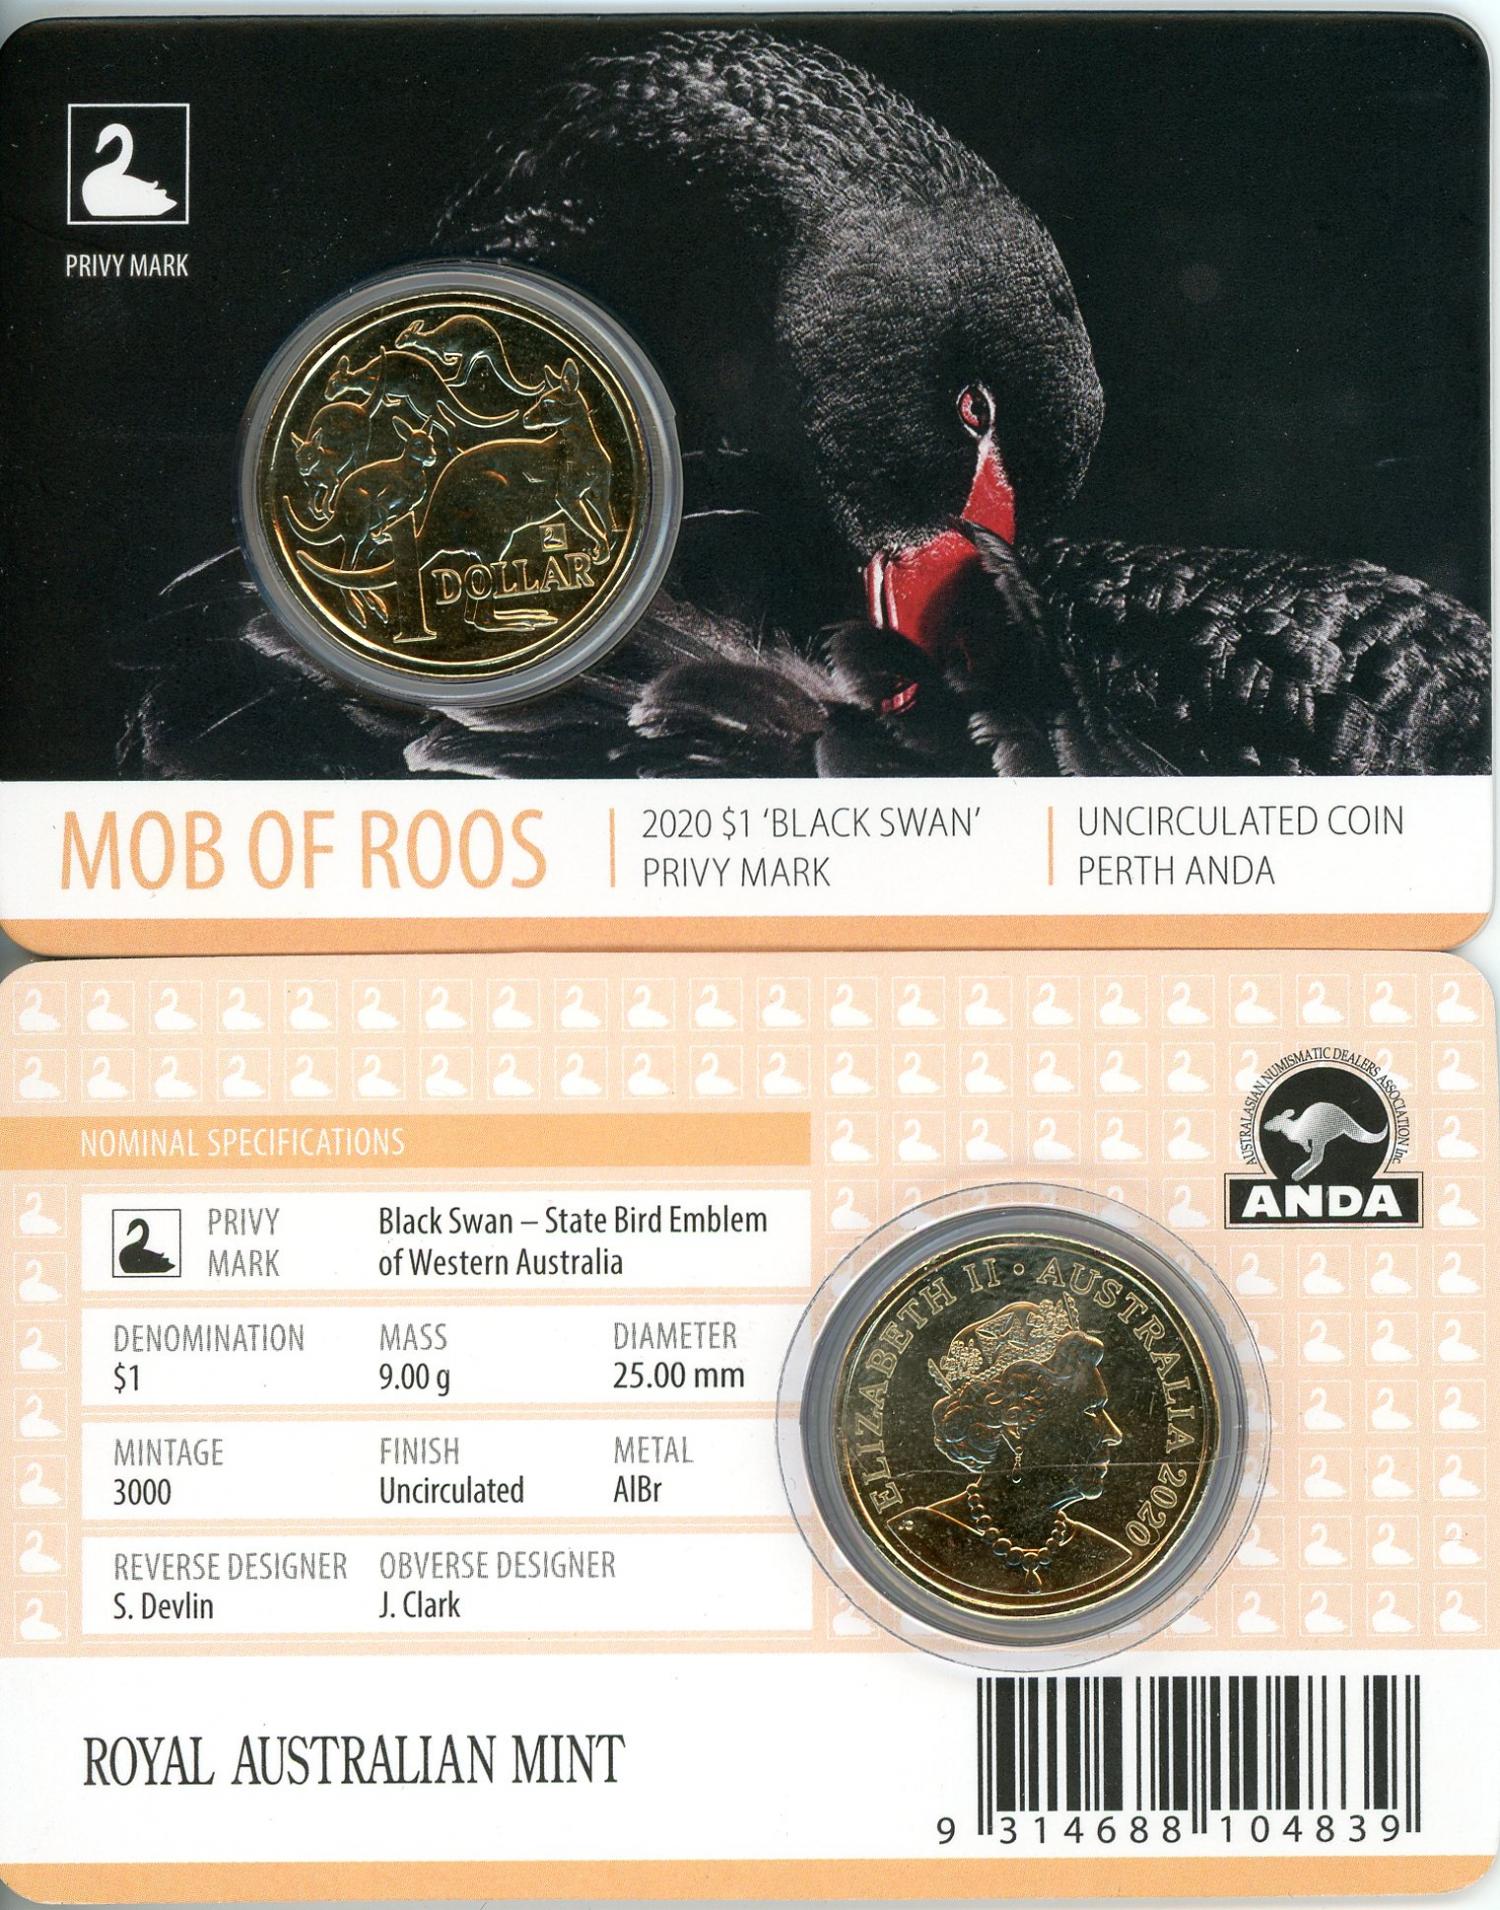 Thumbnail for 2020 Mob of Roos $1 with Black Swan Privy Mark Perth ANDA